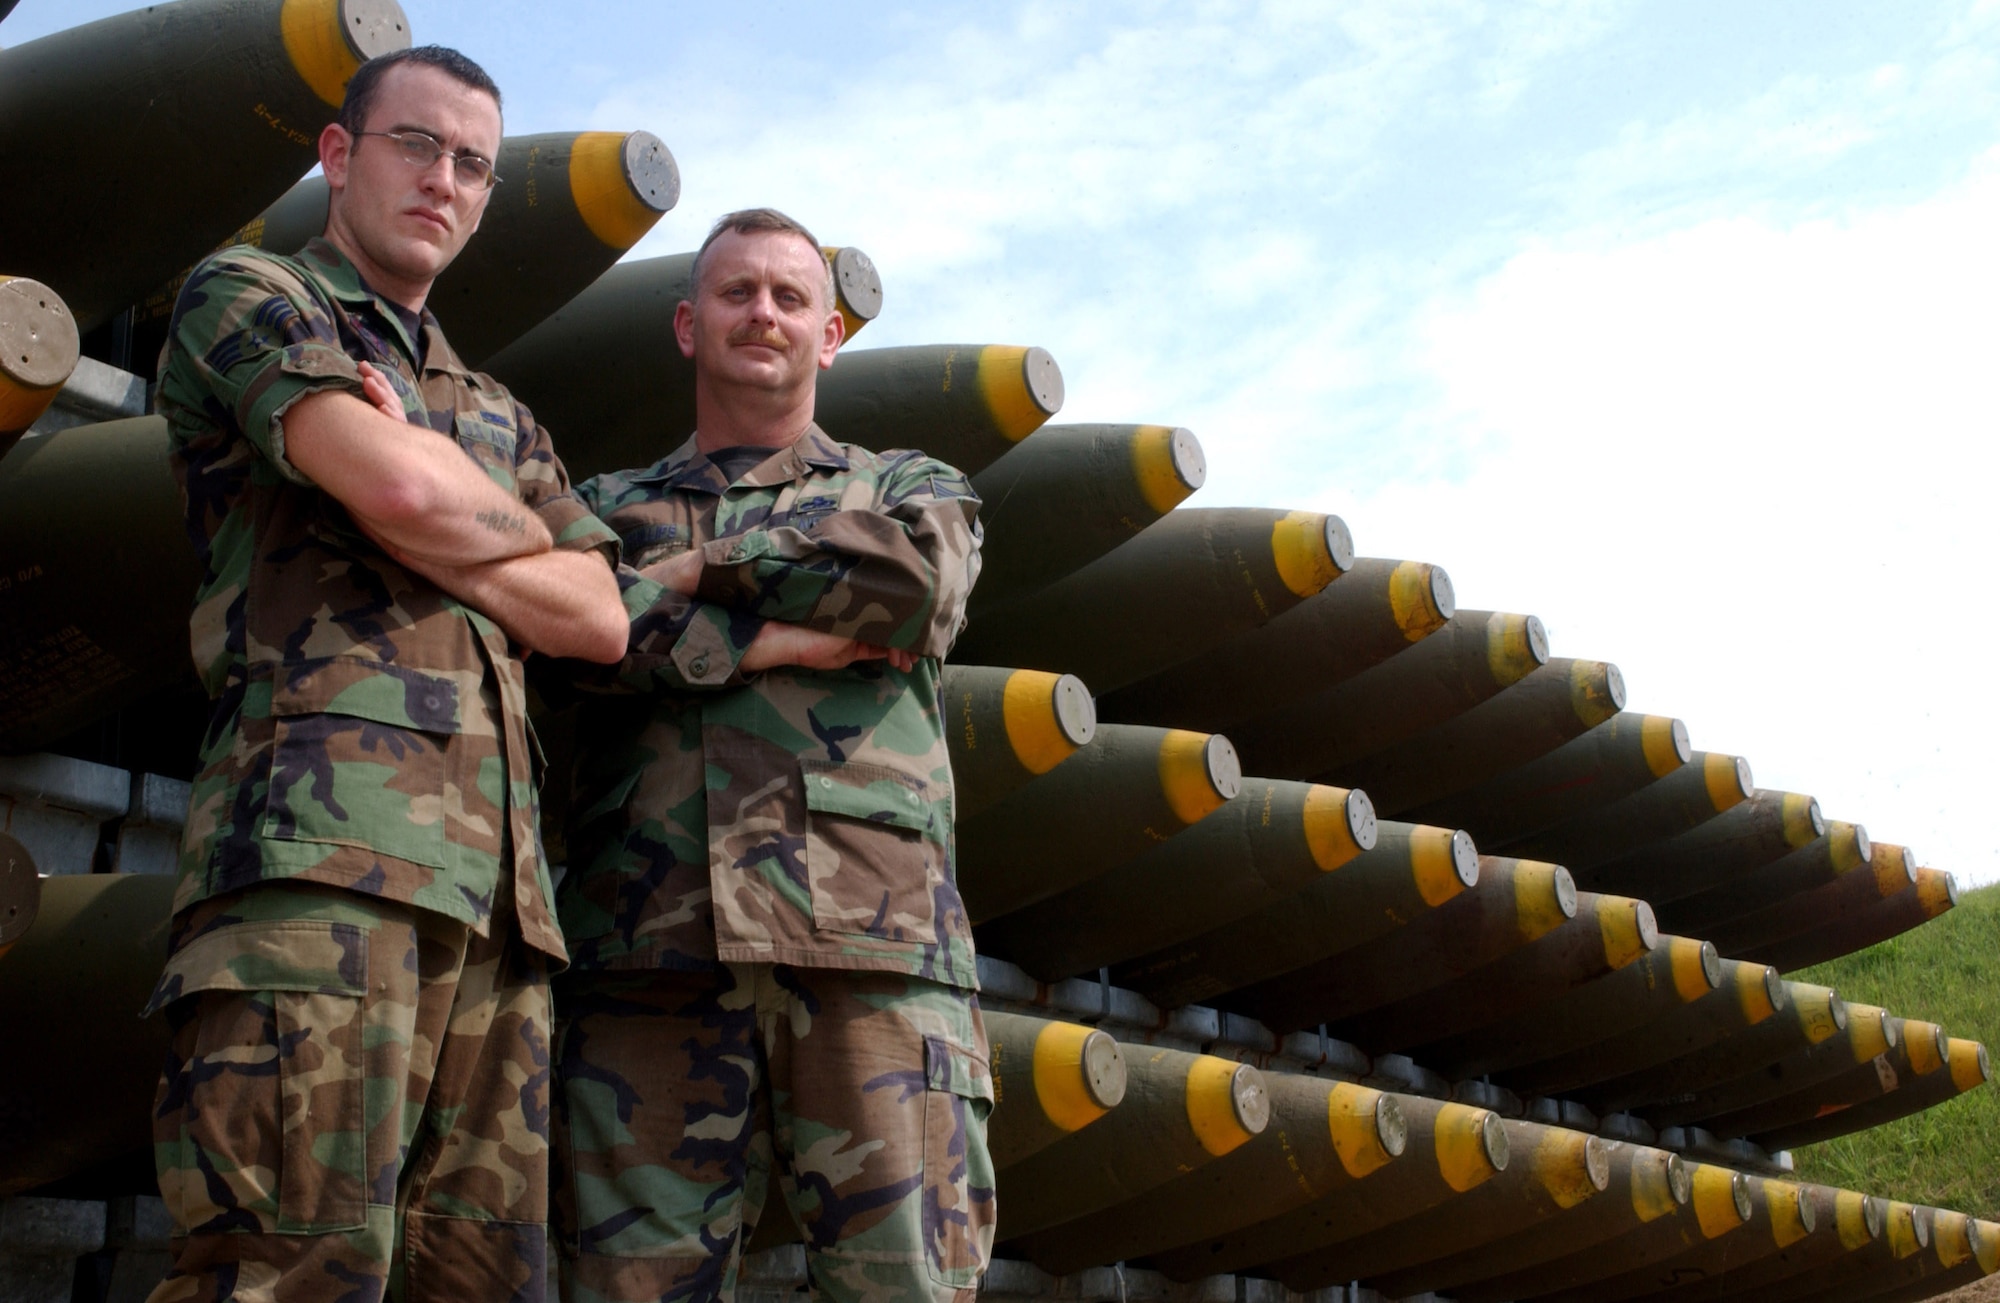 KUNSAN AIR BASE, South Korea -- Senior Airman David Phillips (left) and his father Master Sgt. Torre Phillips, deployed here with the 555th Expeditionary Fighter Squadron "Triple Nickel" from Aviano AB, Italy, work hand-in-hand to ensure 8th Fighter Wing "Wolf Pack" munitions are ready to go at a moment's notice. Sergeant Phillips is deployed here in support of a four-month air expeditionary force rotation while his son completes a one-year remote tour here. Airman Phillips is assigned to the 8th Maintenance Squadron here. (U.S. Air Force photo/Senior Airman Steven Doty)                               